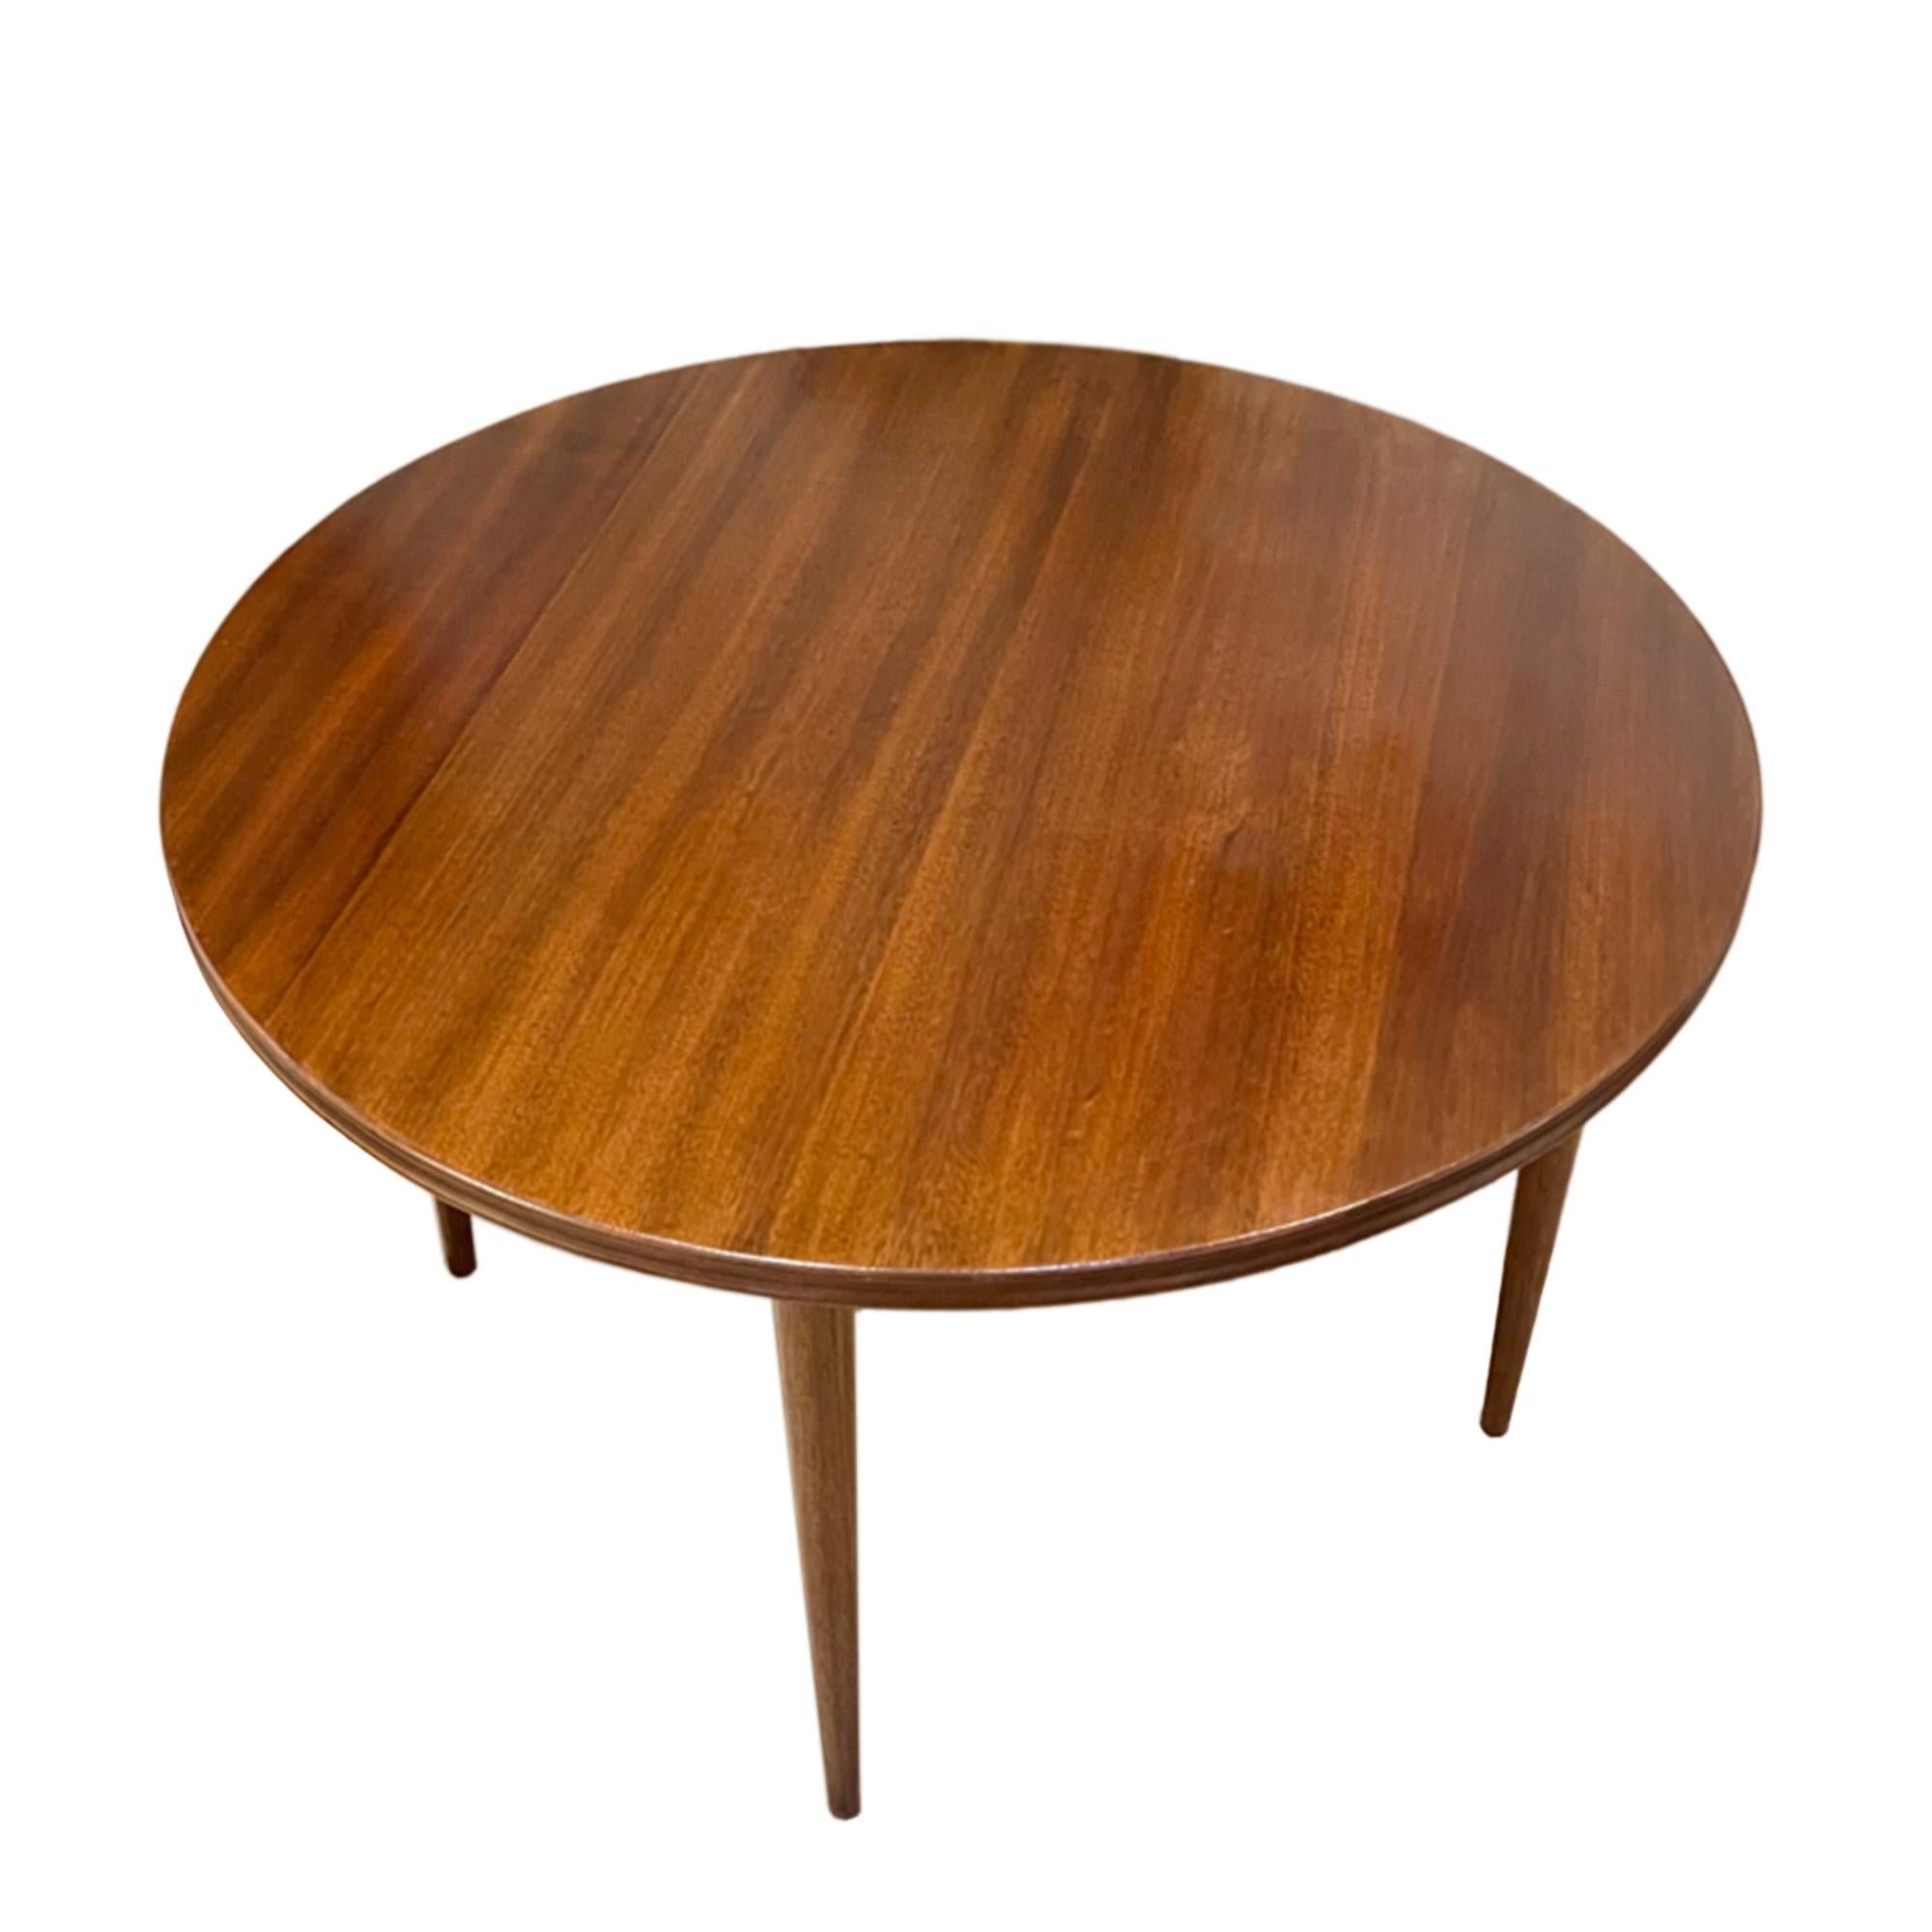 A simple but stylish design - this teak coffee table was made in Denmark in the 1960s. 

Please take a look at all the pictures to see the detail of the grain. 

Our restorer has re-polished this piece, so it's in great condition.

A classic piece